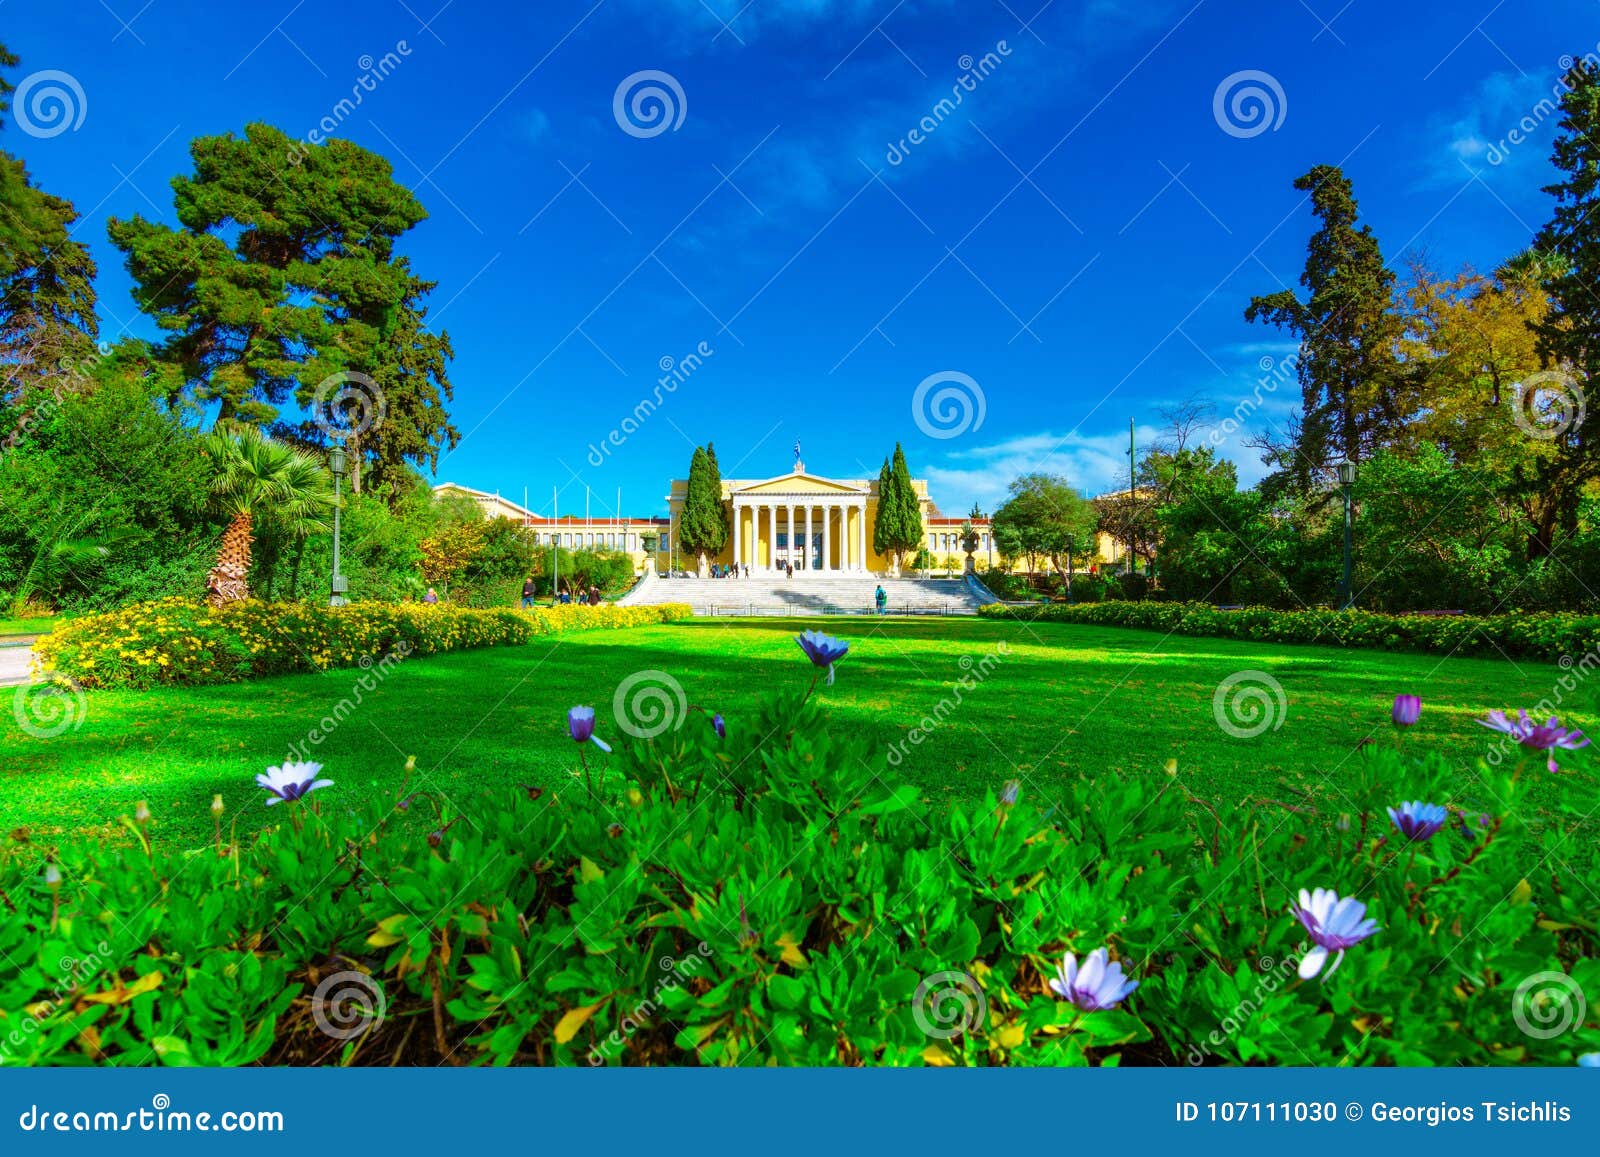 Zappeion Hall In The National Gardens In Athens Greece Zappeion